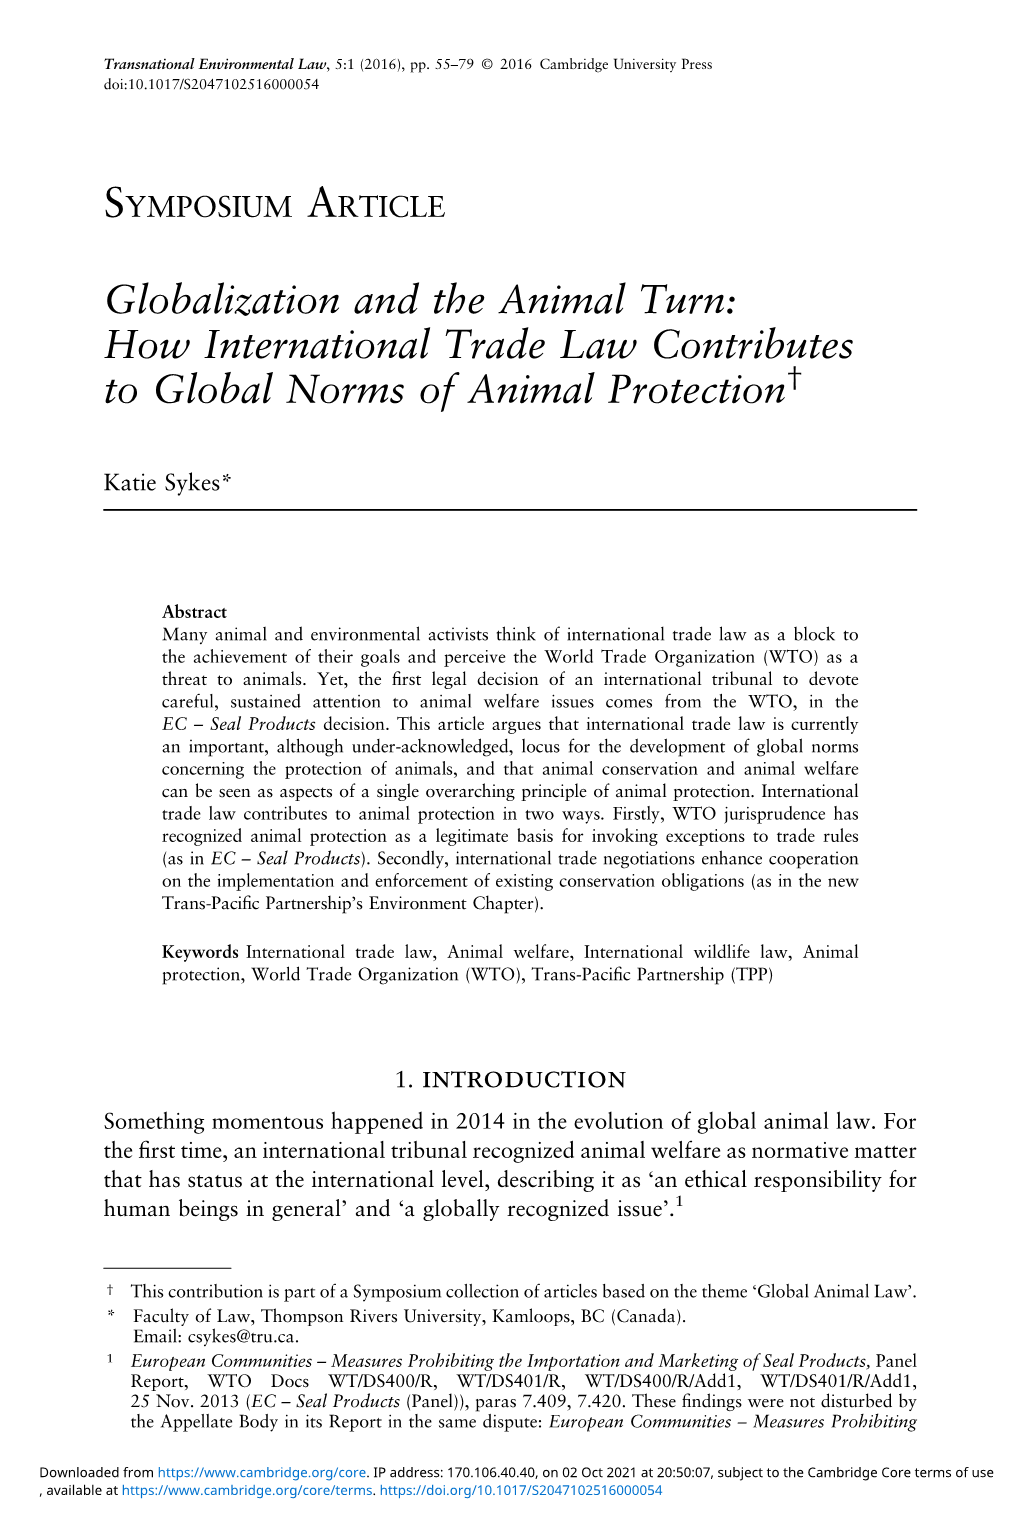 Globalization and the Animal Turn: How International Trade Law Contributes † to Global Norms of Animal Protection